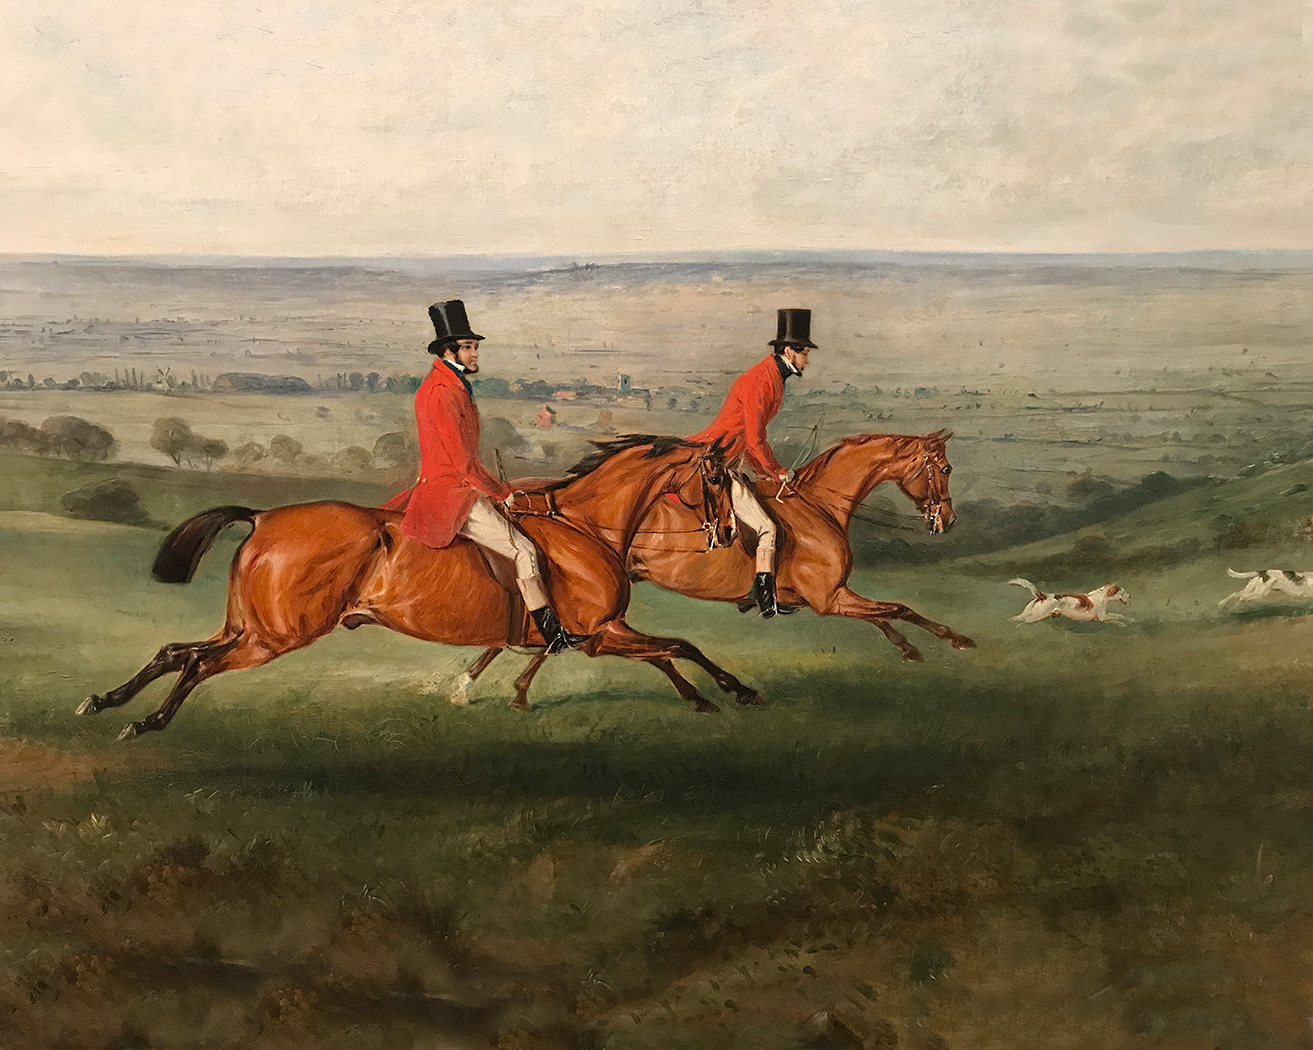 Equestrian/Fox Equestrian Across the Meadow Framed Oil Painting  ...